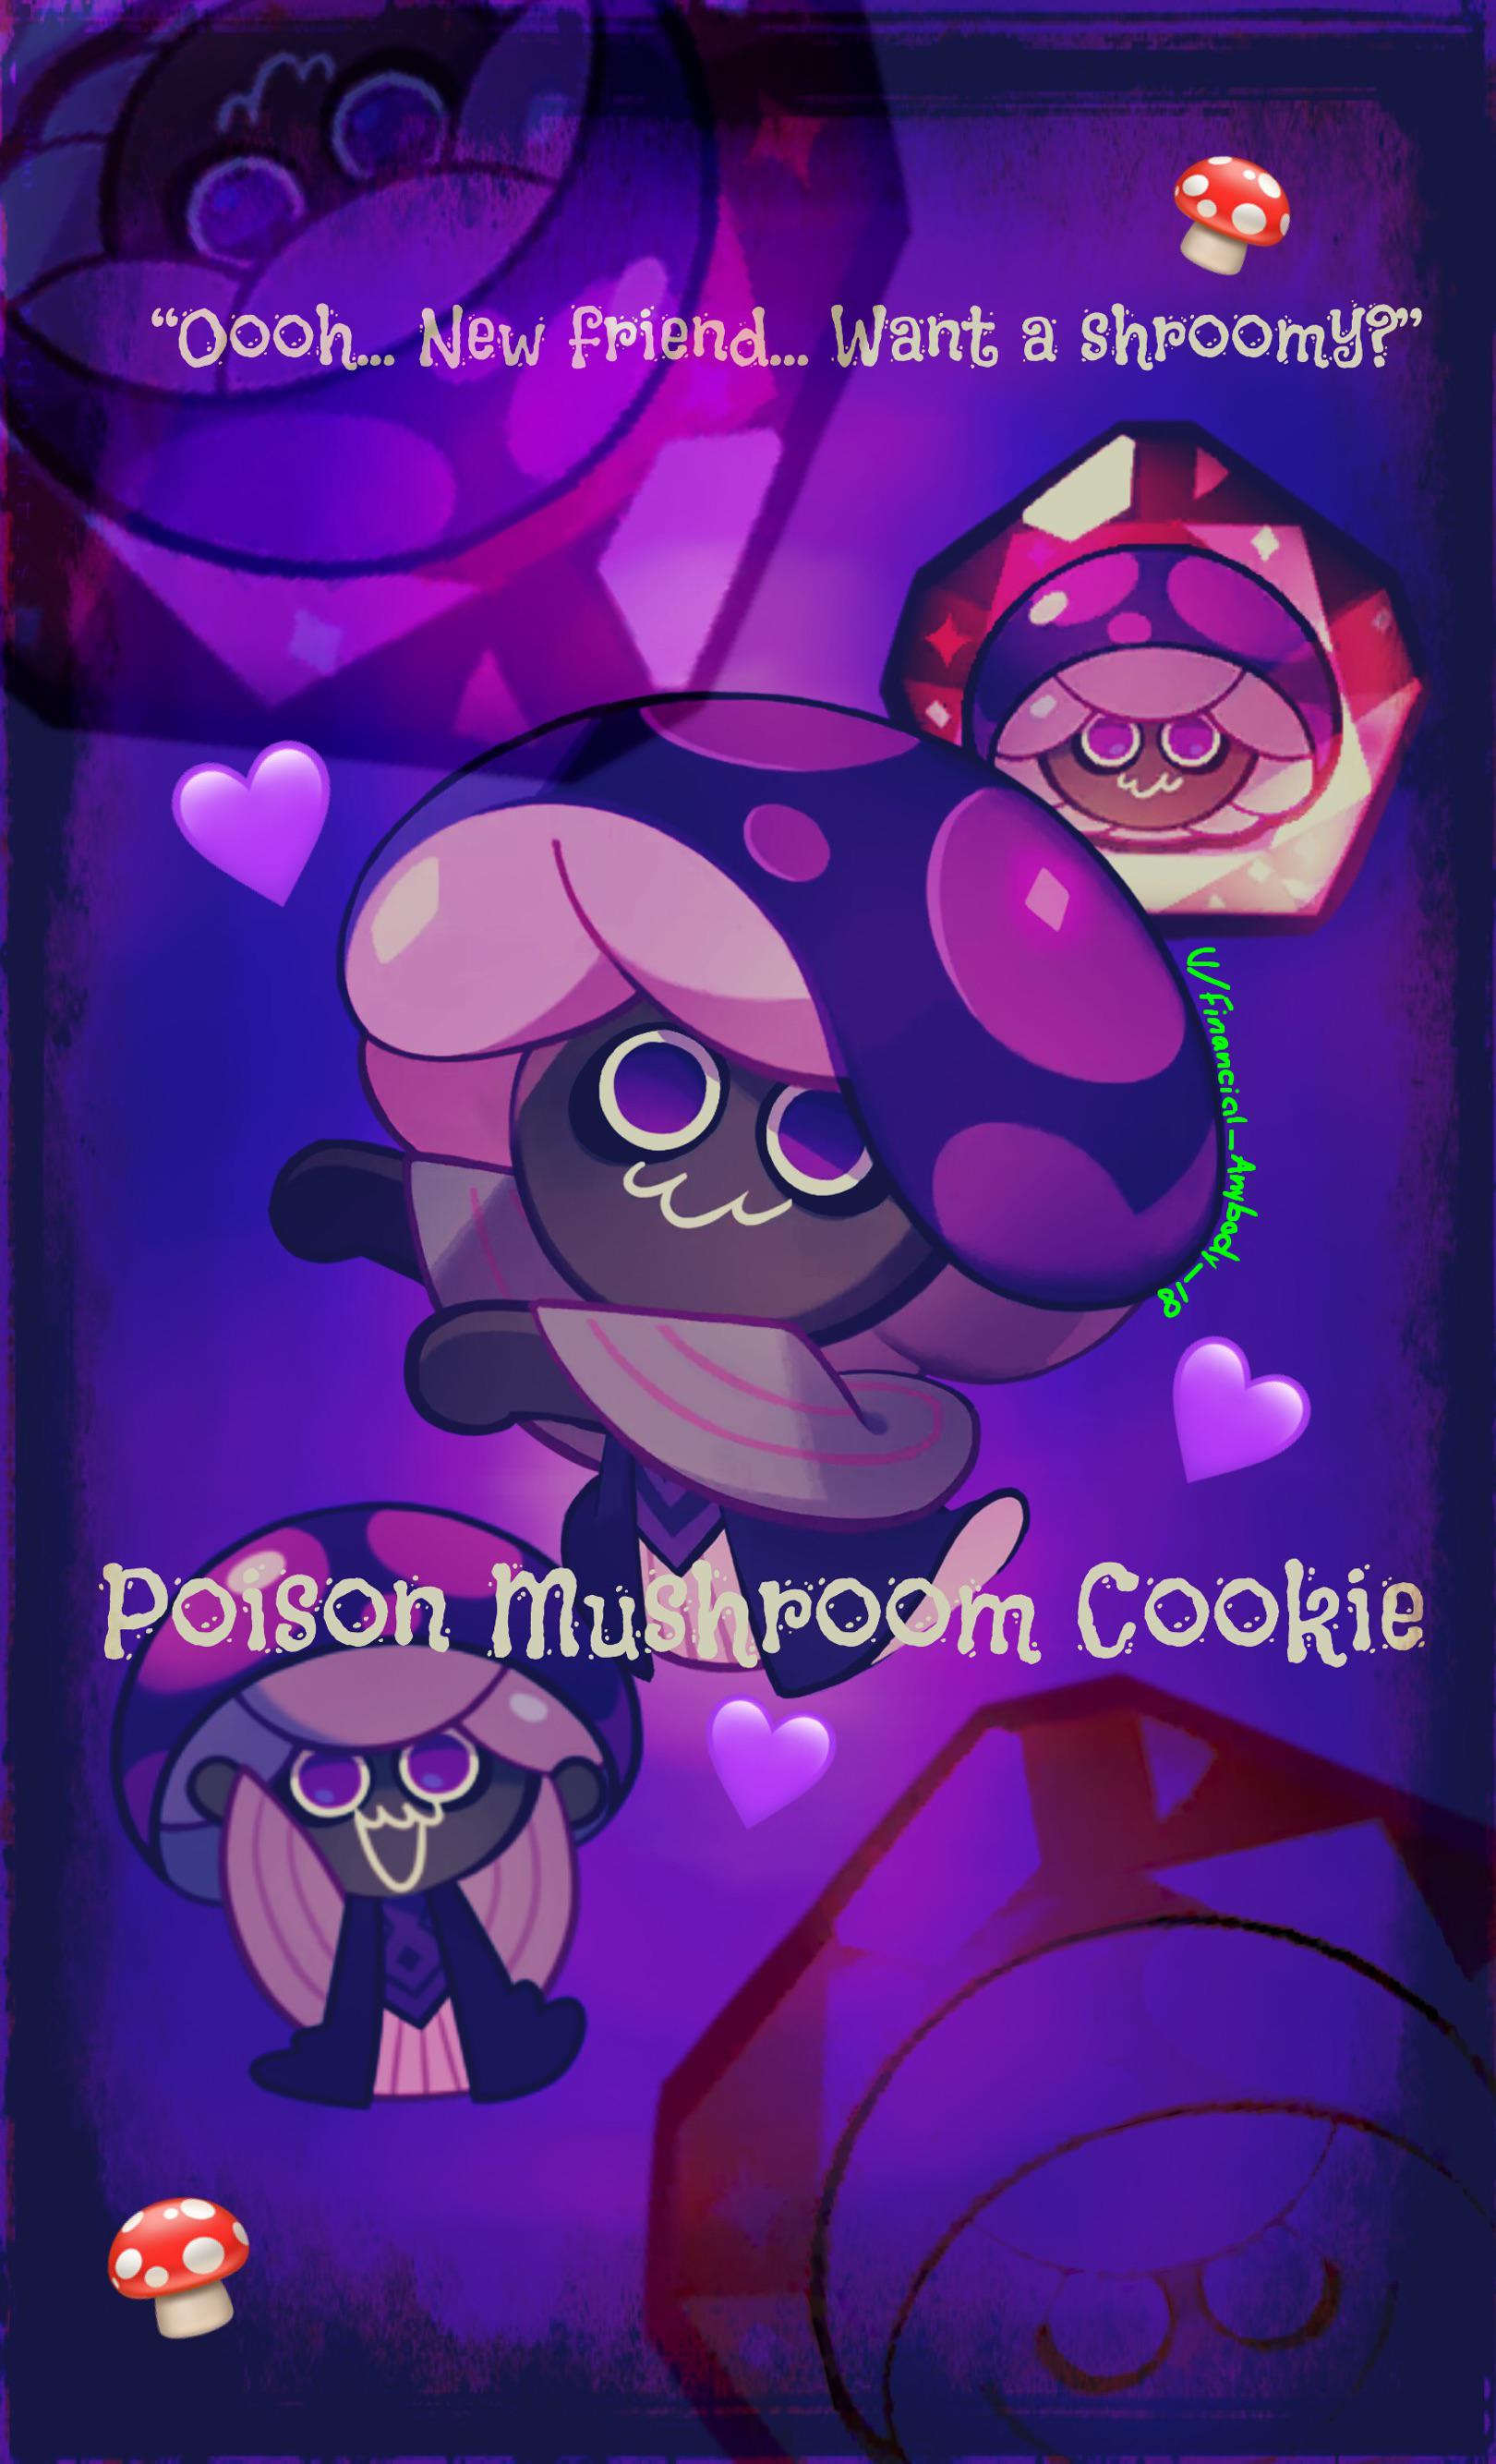 Got bored and made a little Wallpaper of Poison Mushroom Cookie for a friend but I'm planning on making more in the future wasn't sure of what flair and used 'Other' to